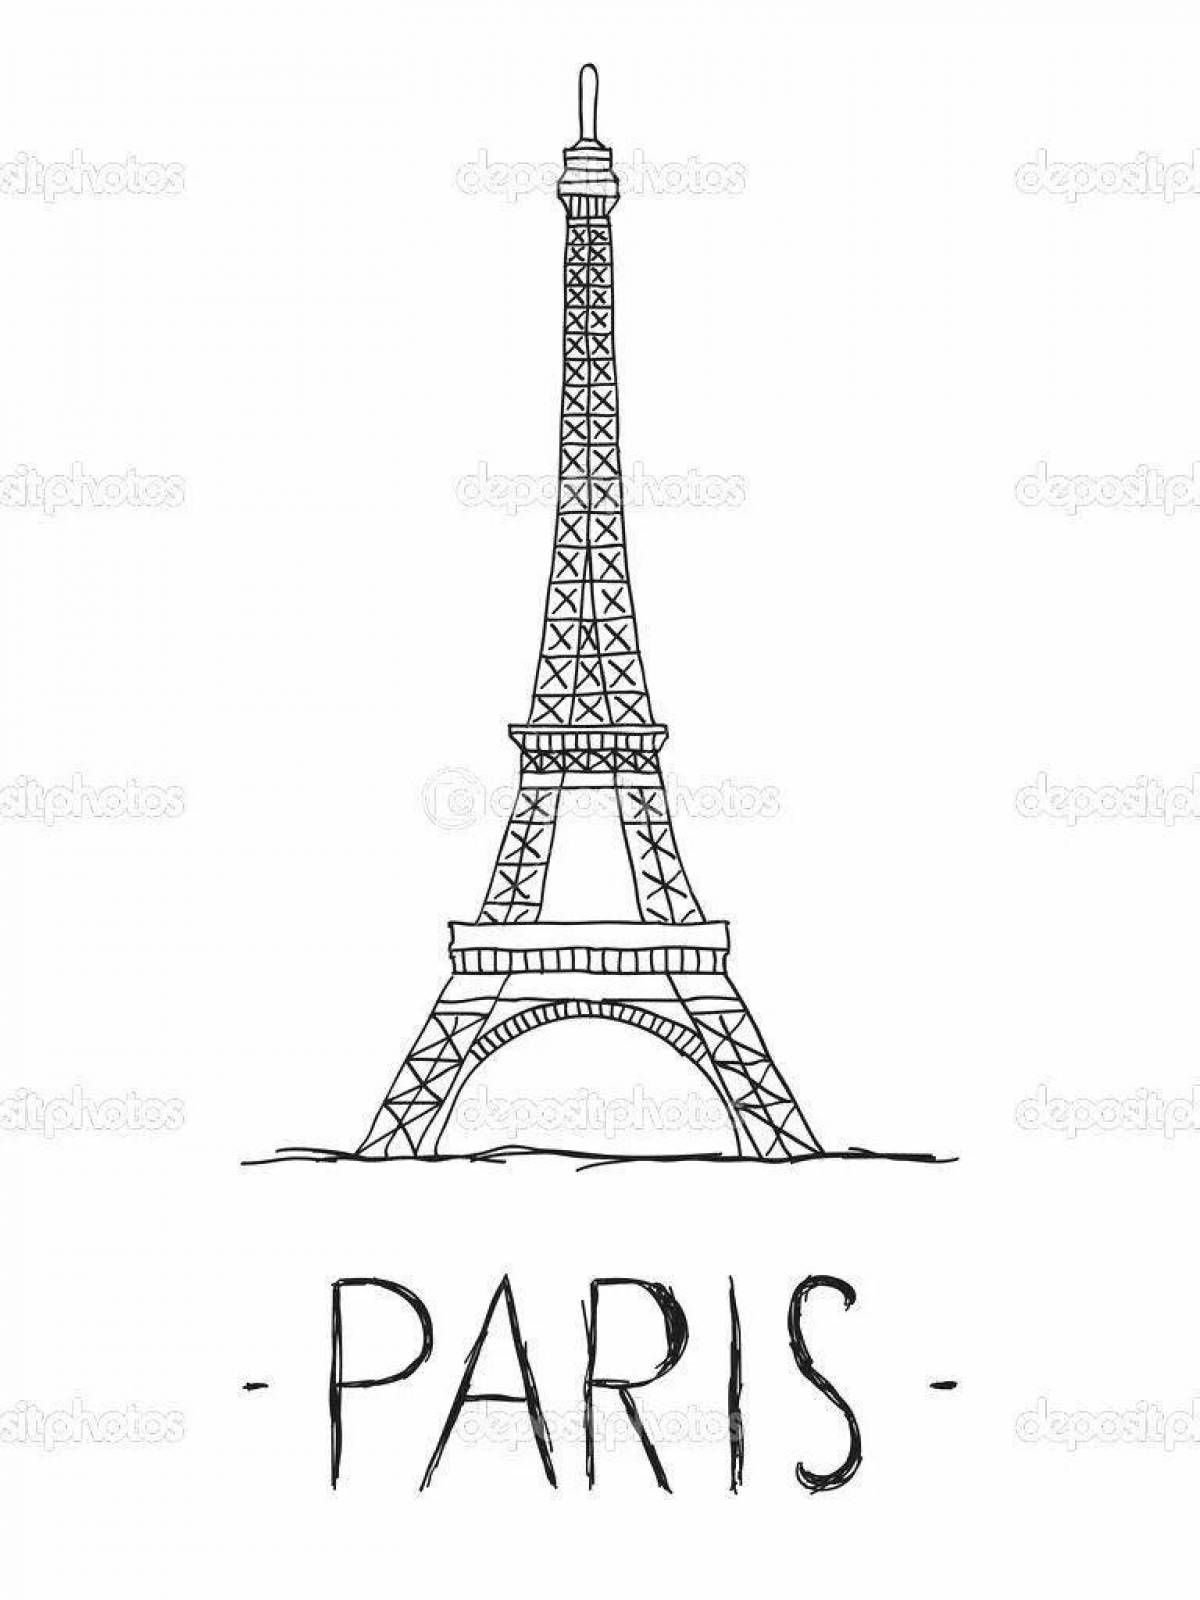 Coloring page dazzling eiffel tower